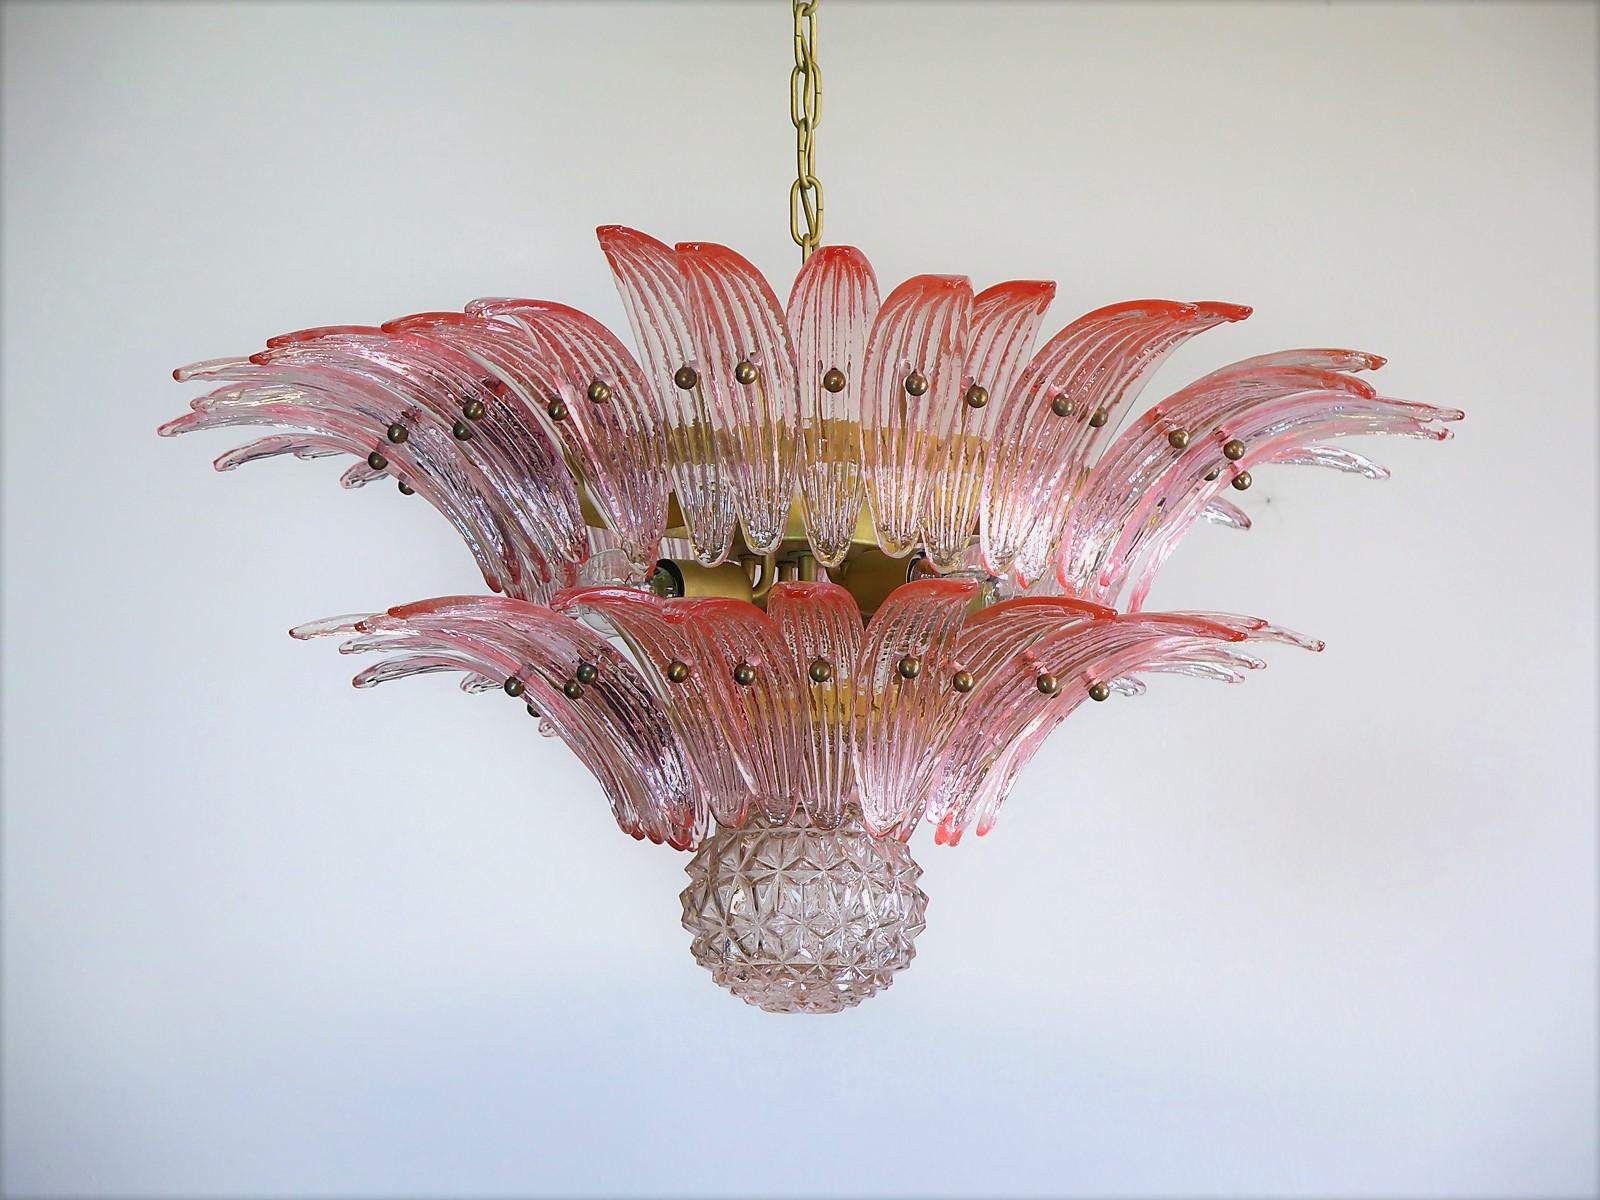 Luxury and genuine Murano glass chandelier. Handmade in Murano. It made by 58 Murano pink crystal glasses in a gold metal frame. The chandelier has also a Murano glass ball in the end of the lamp. Murano blown glass in a traditional way.
Period: